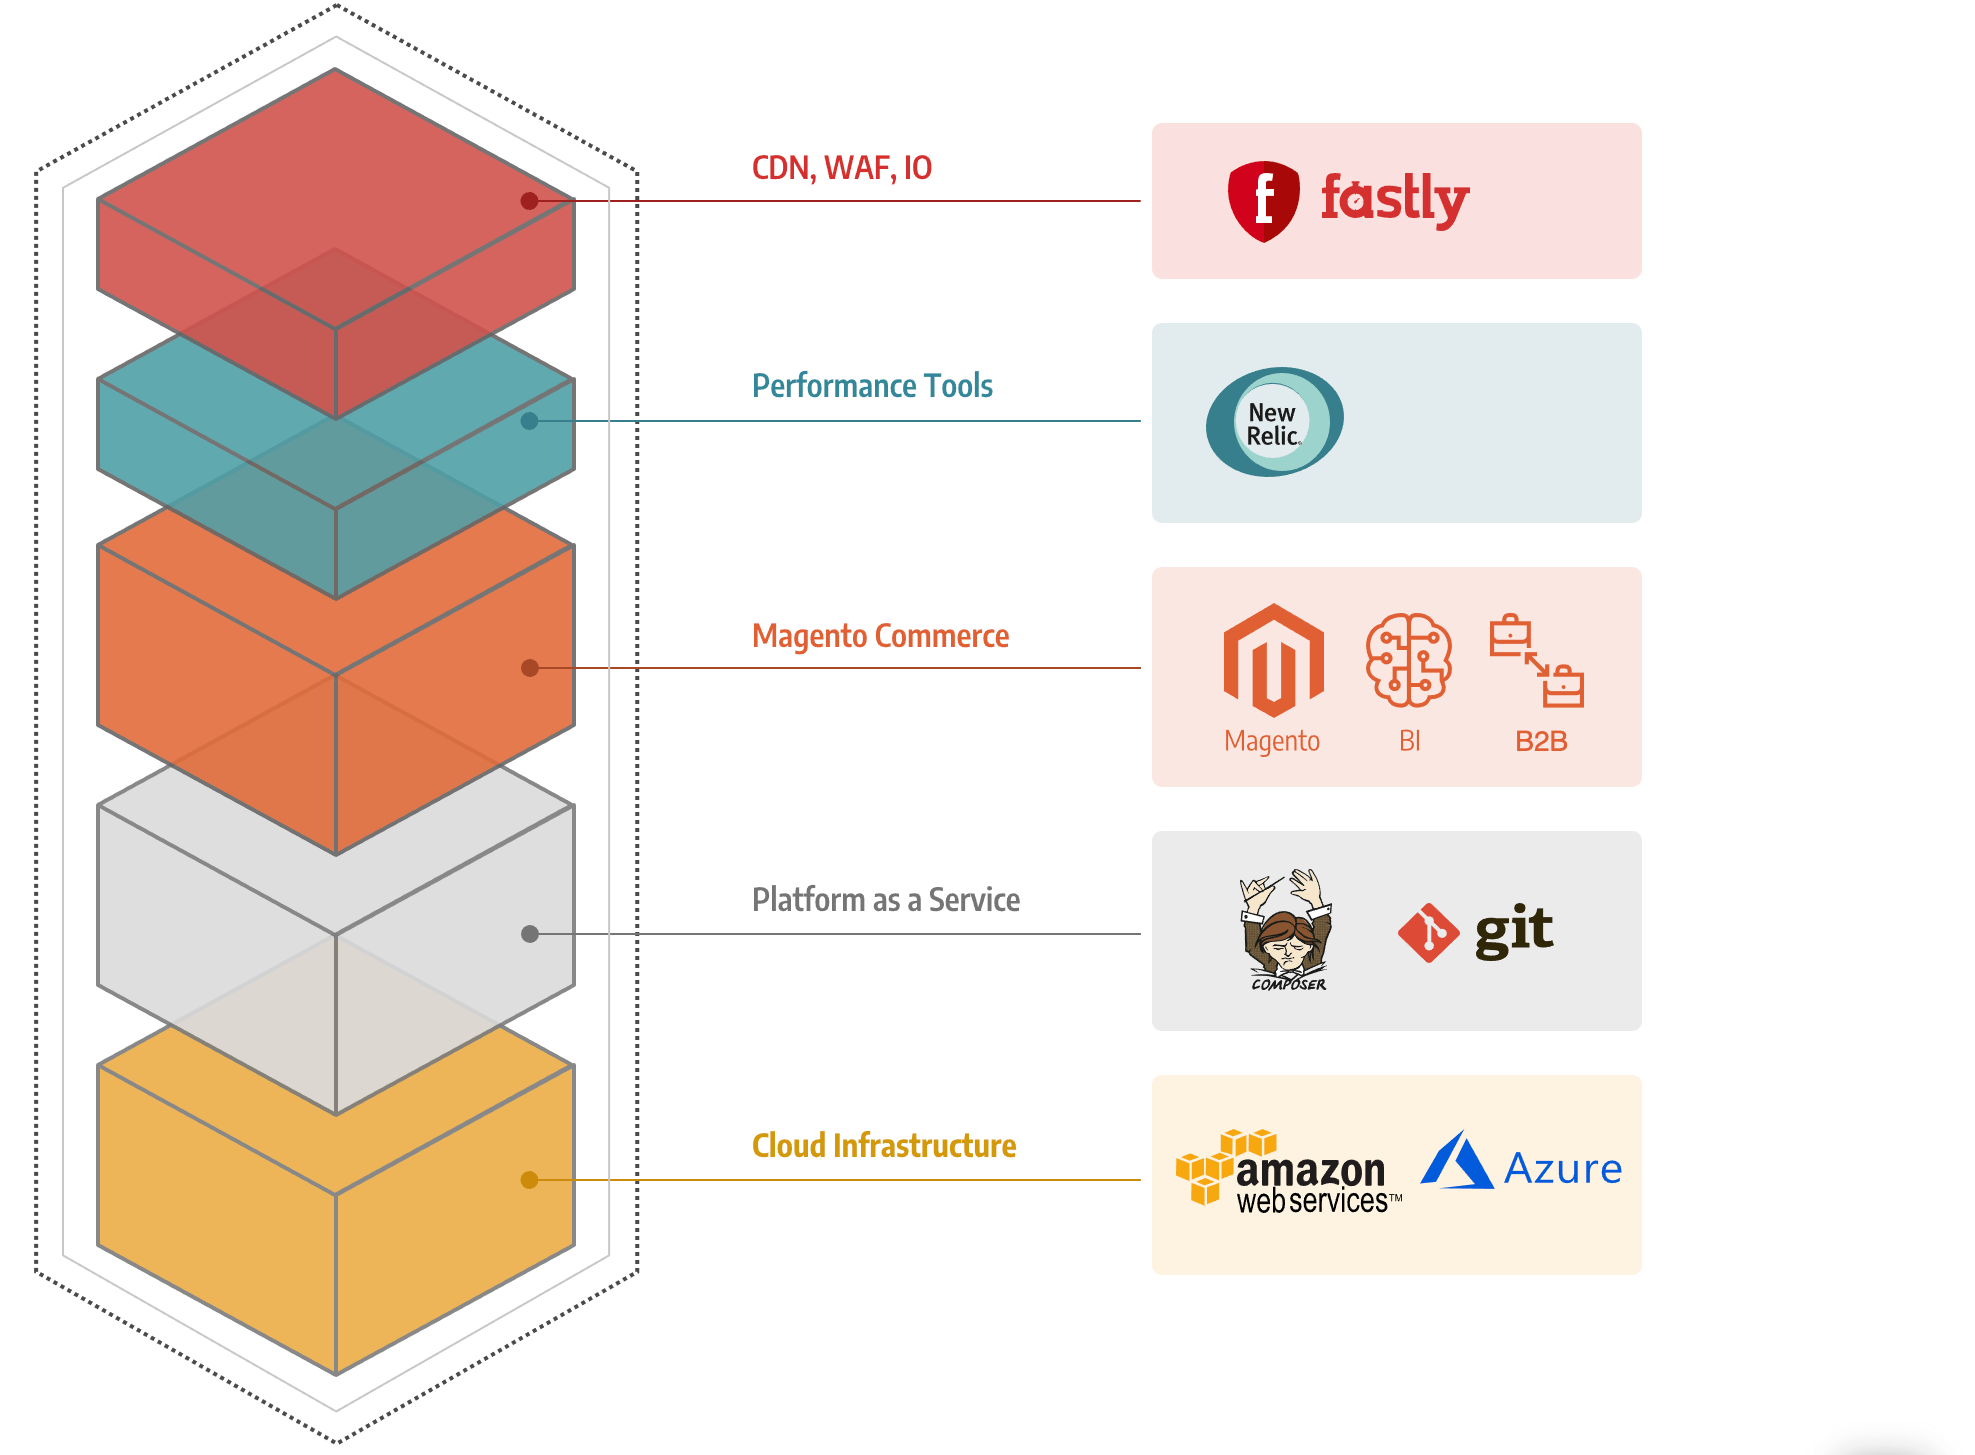 A graph showing Adobe Commerce stack features, like Amazon, fastly, git, and more.